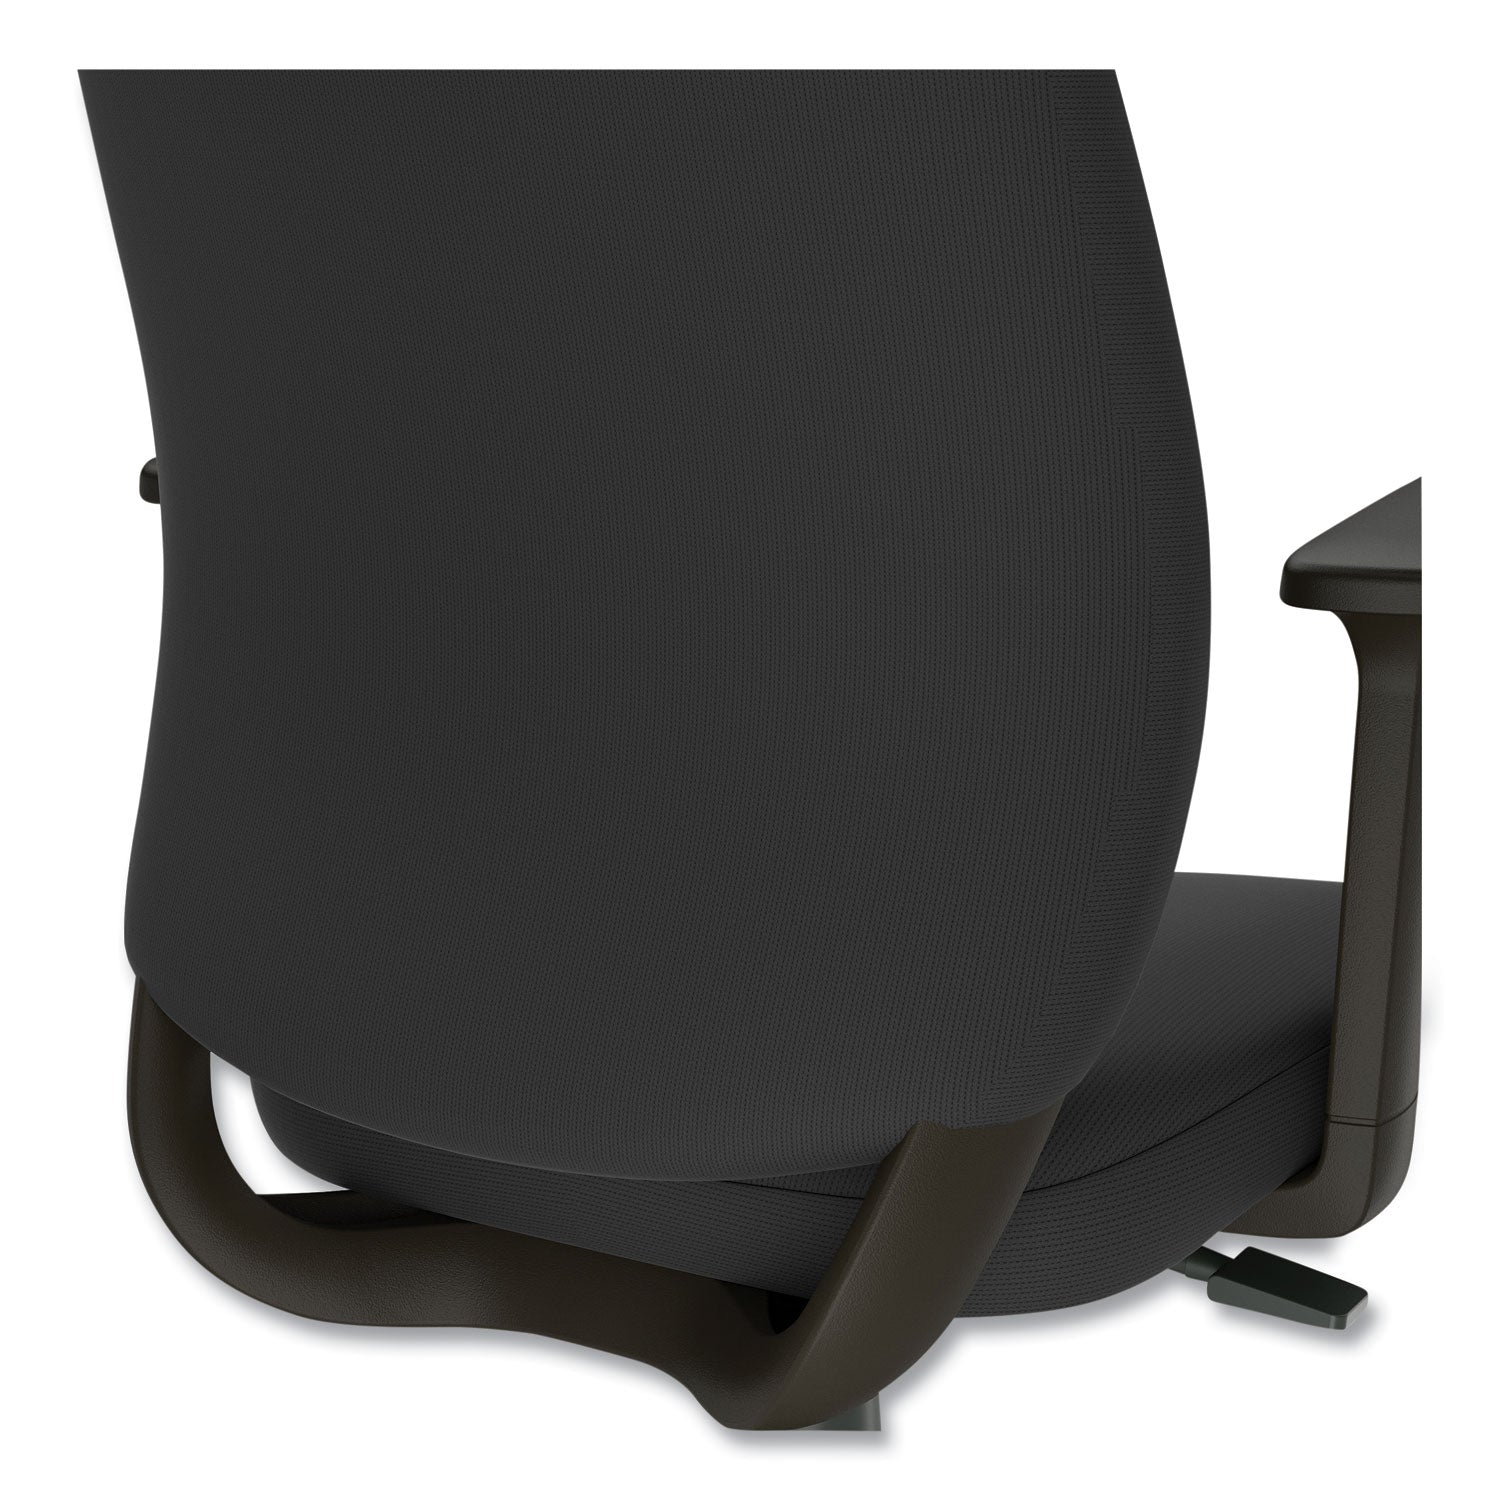 essentials-fabric-drafting-stool-with-arms-supports-up-to-275-lb-black-seat-back-black-base_uos59388 - 5